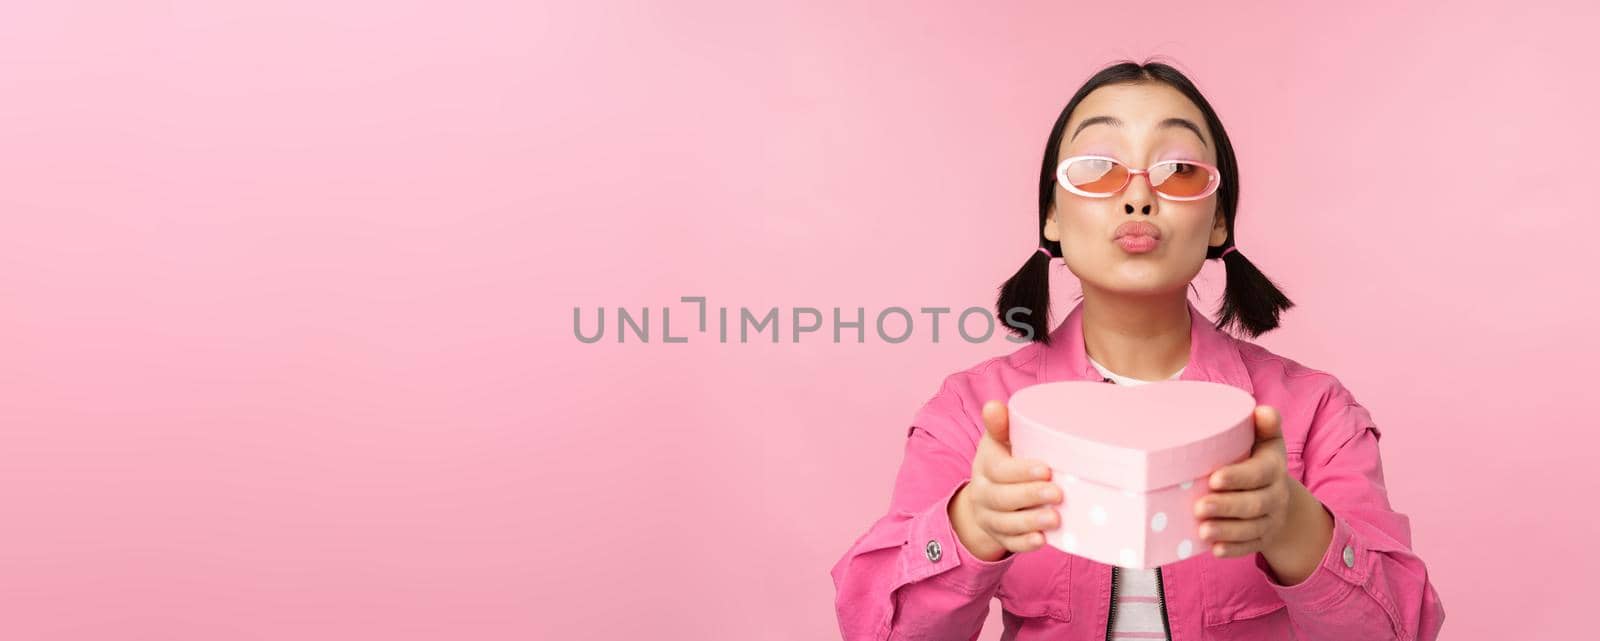 Cute asian girl giving you gift in heart shaped box, kissing and smiling, concept of holiday and celebration, standing over pink background.